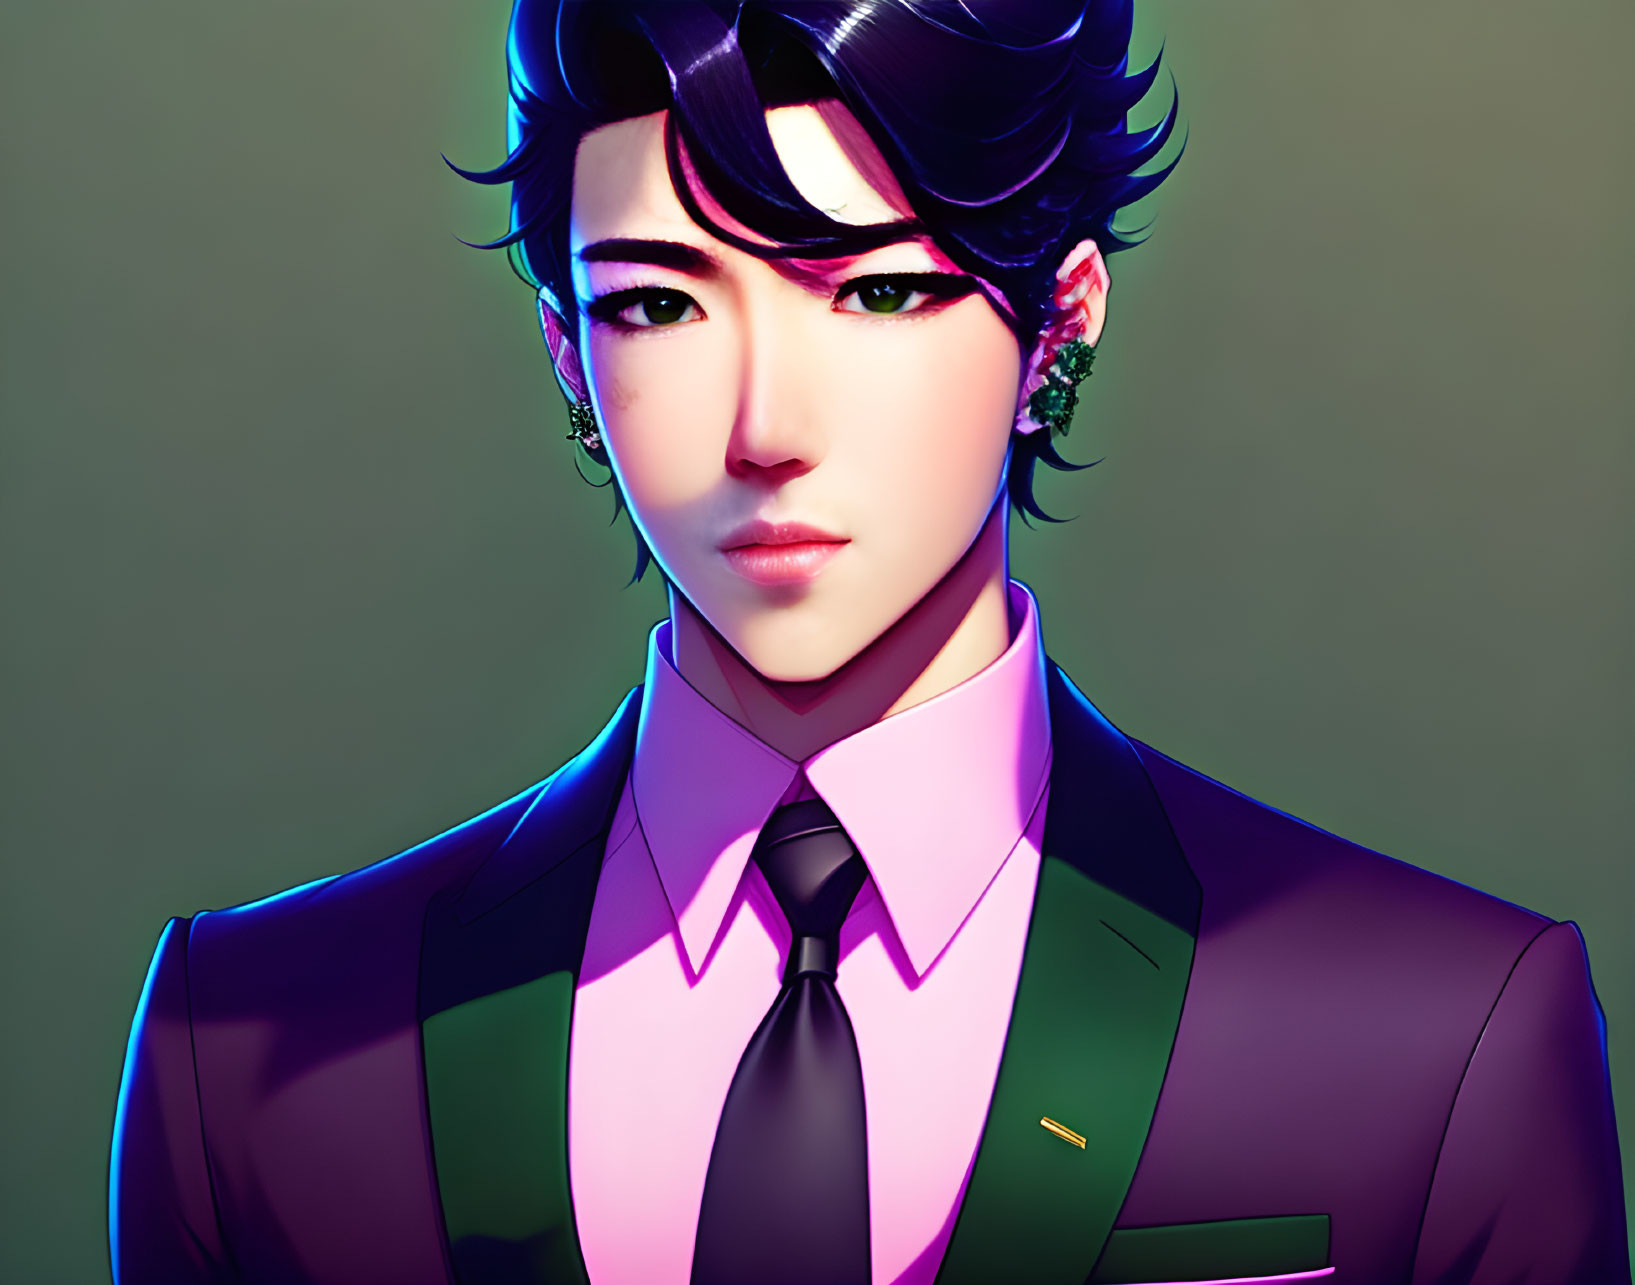 Digital illustration of a person in sharp-featured suit with pink and green shades